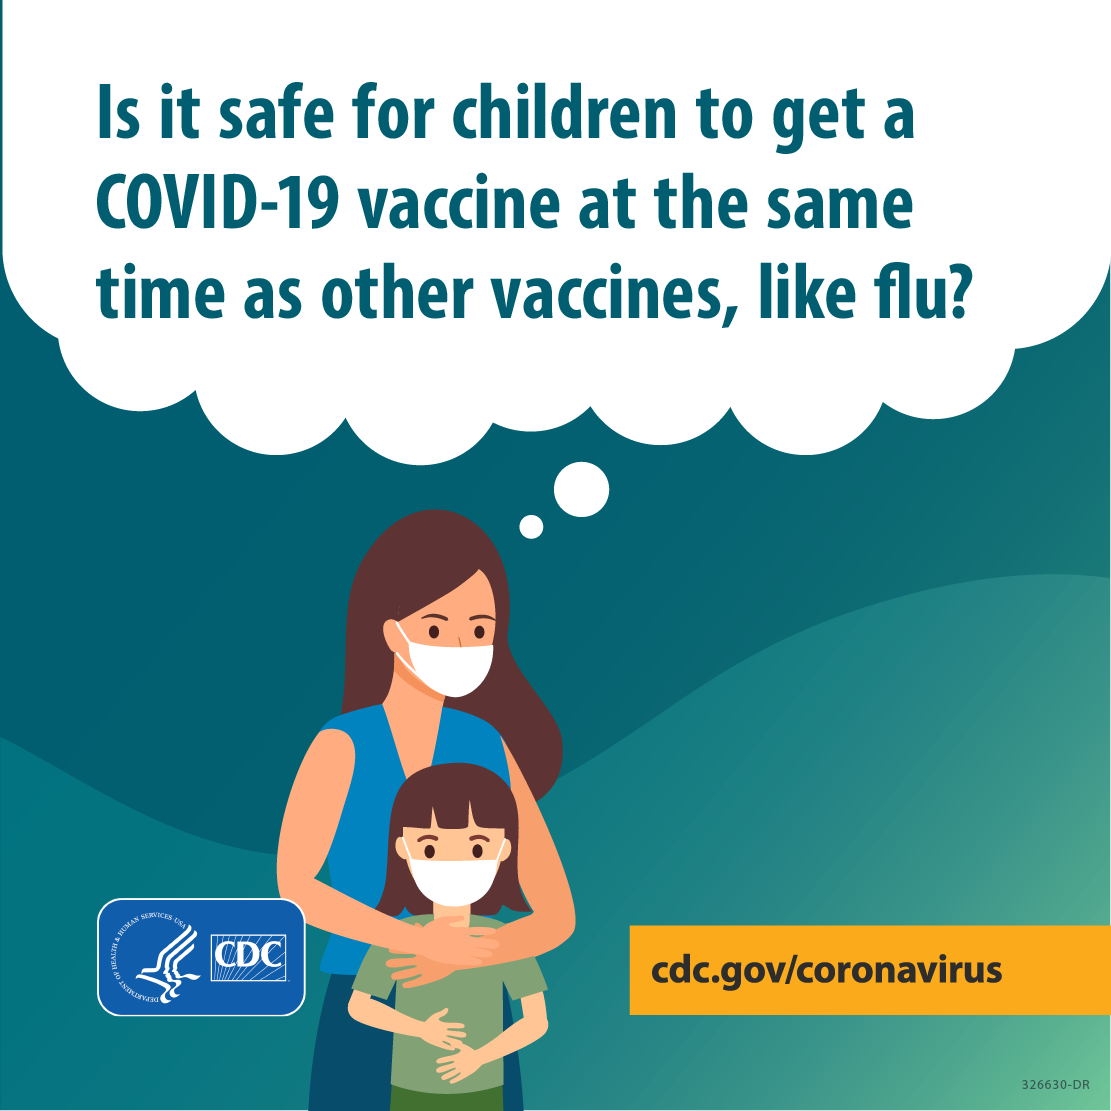 Cartoon graphic of a mother embracing her child. Over the mother's head is a thought bubble reading "Is it safe for children to get a COVID-19 vaccine at the same time as other vaccines, like flu?"